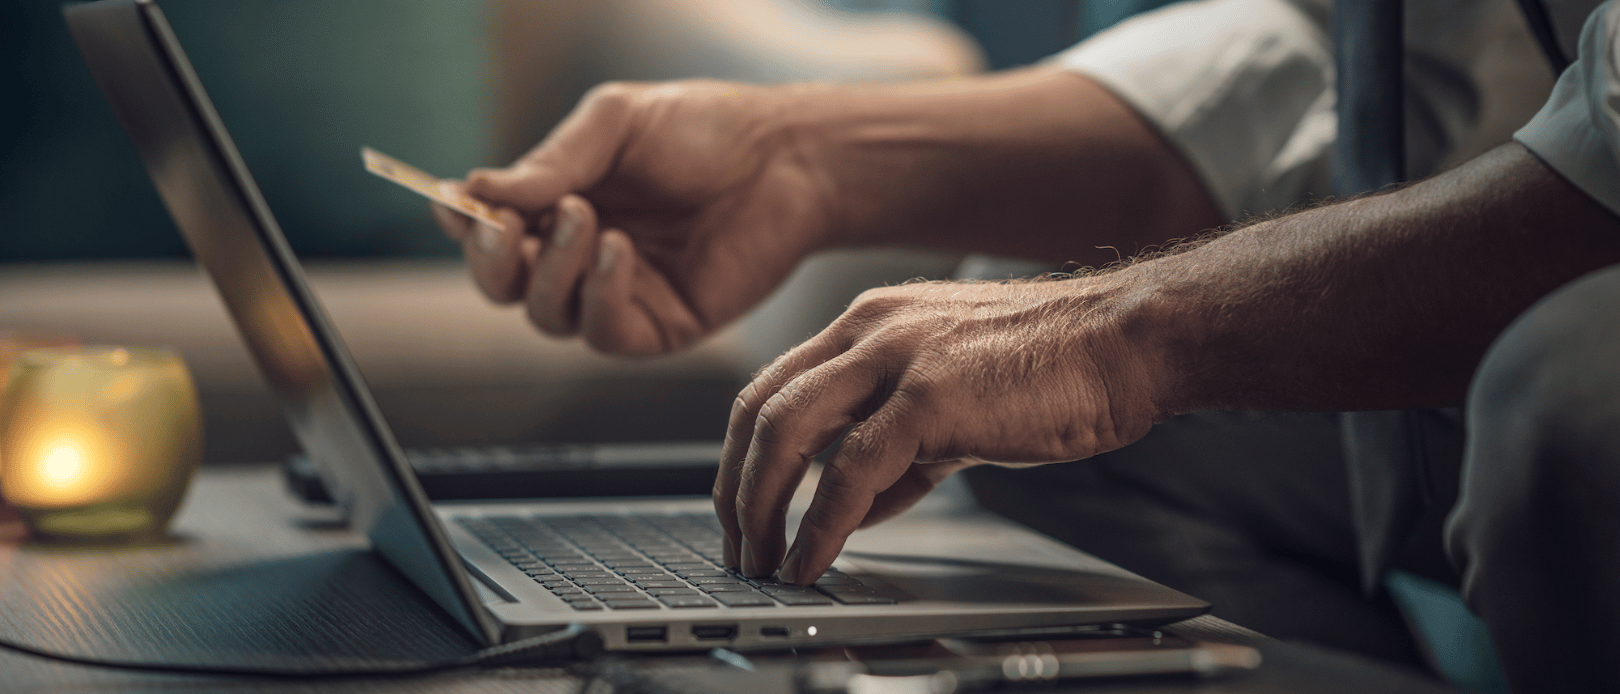 Businessman using a credit card online, he is doing online shopping and using banking services on his laptop, hands close up